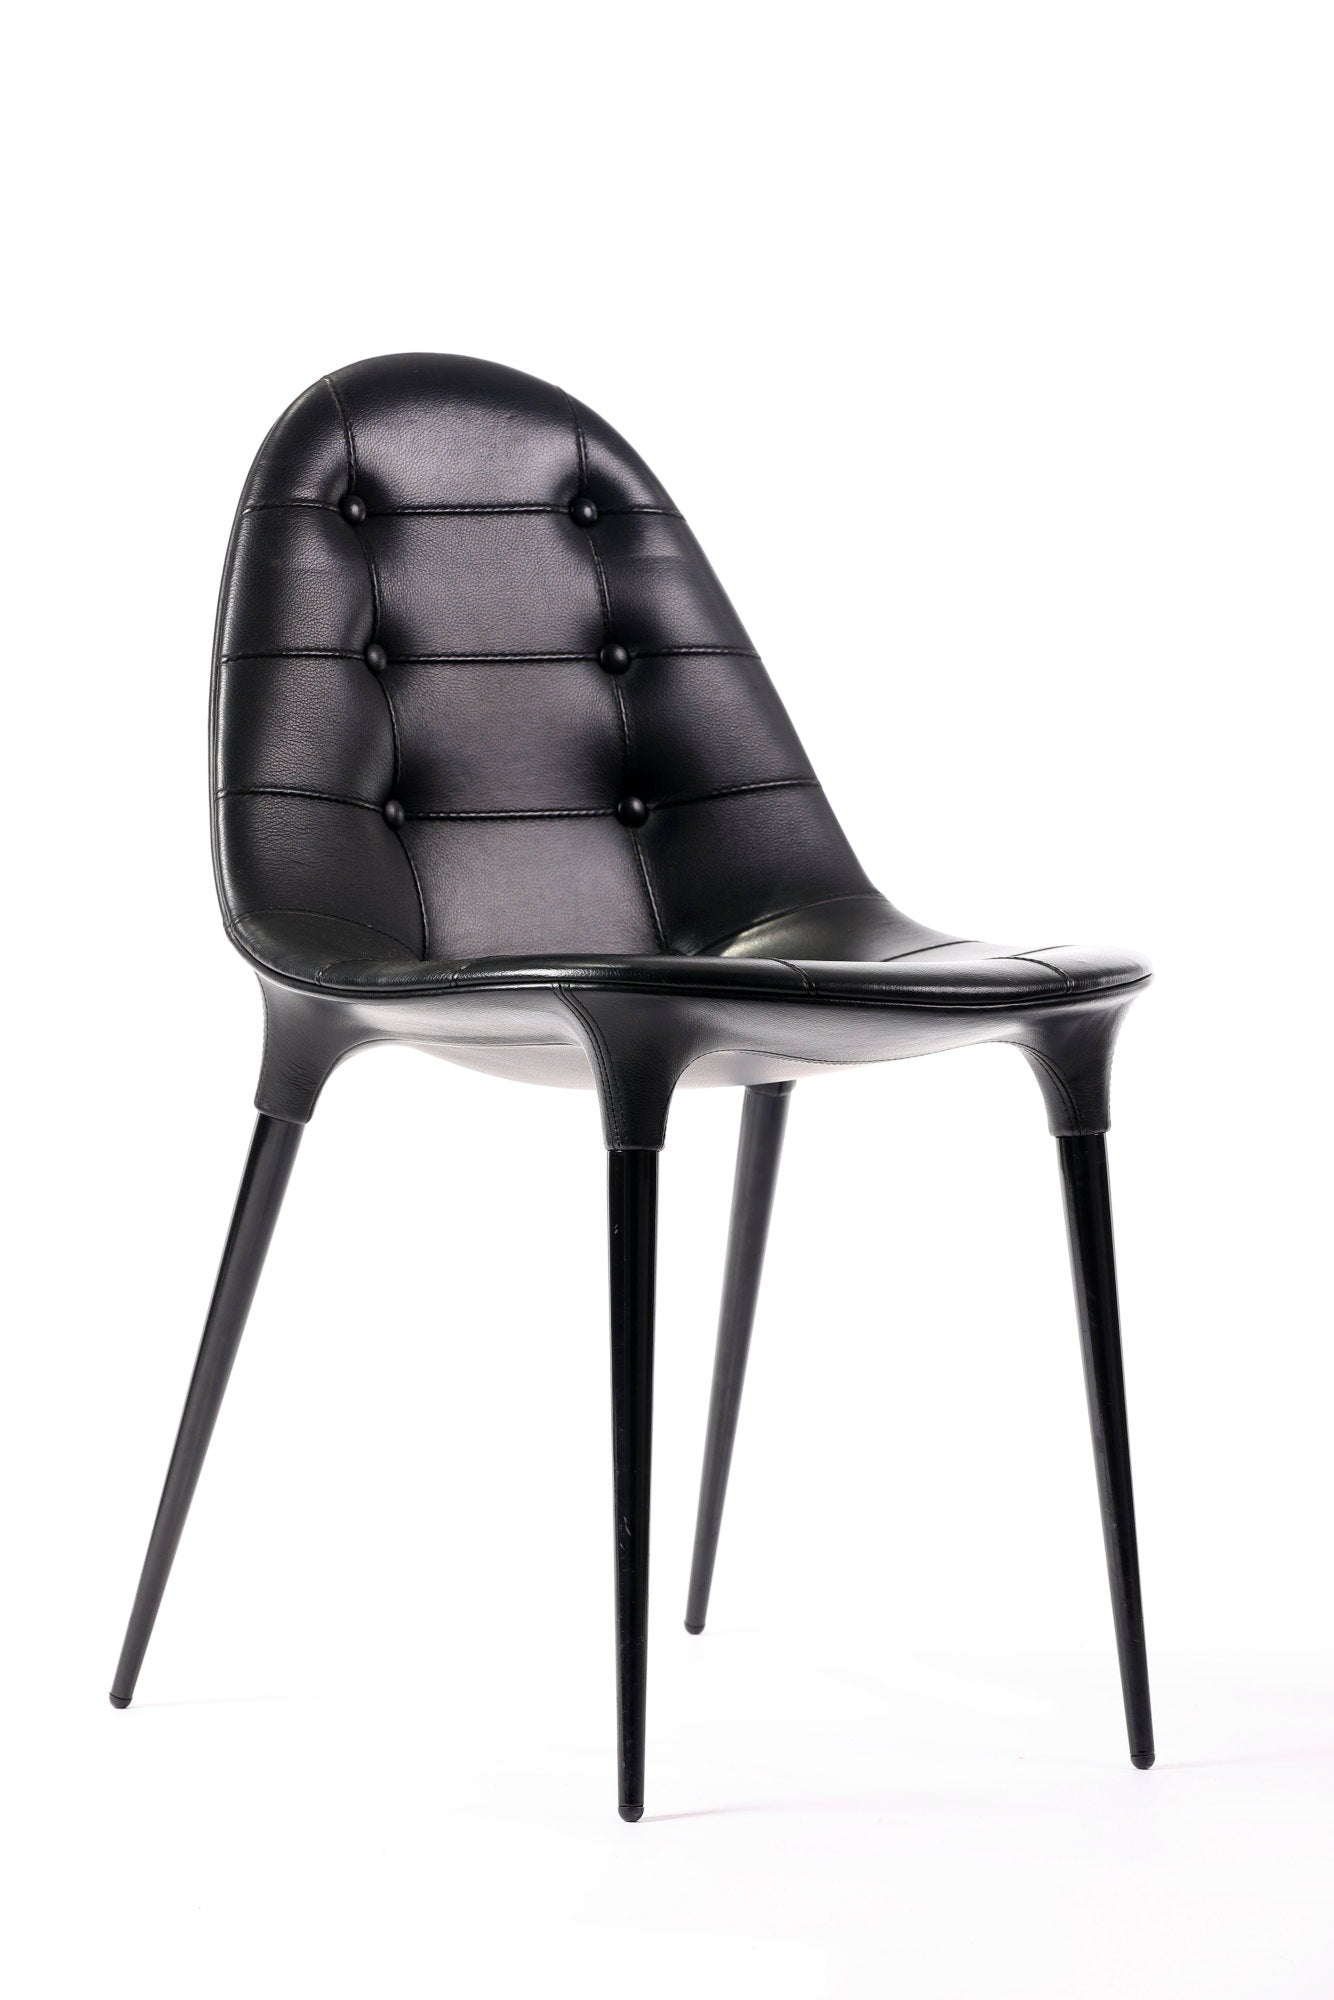 4 Cassina Caprice chairs designed by Philippe Starck